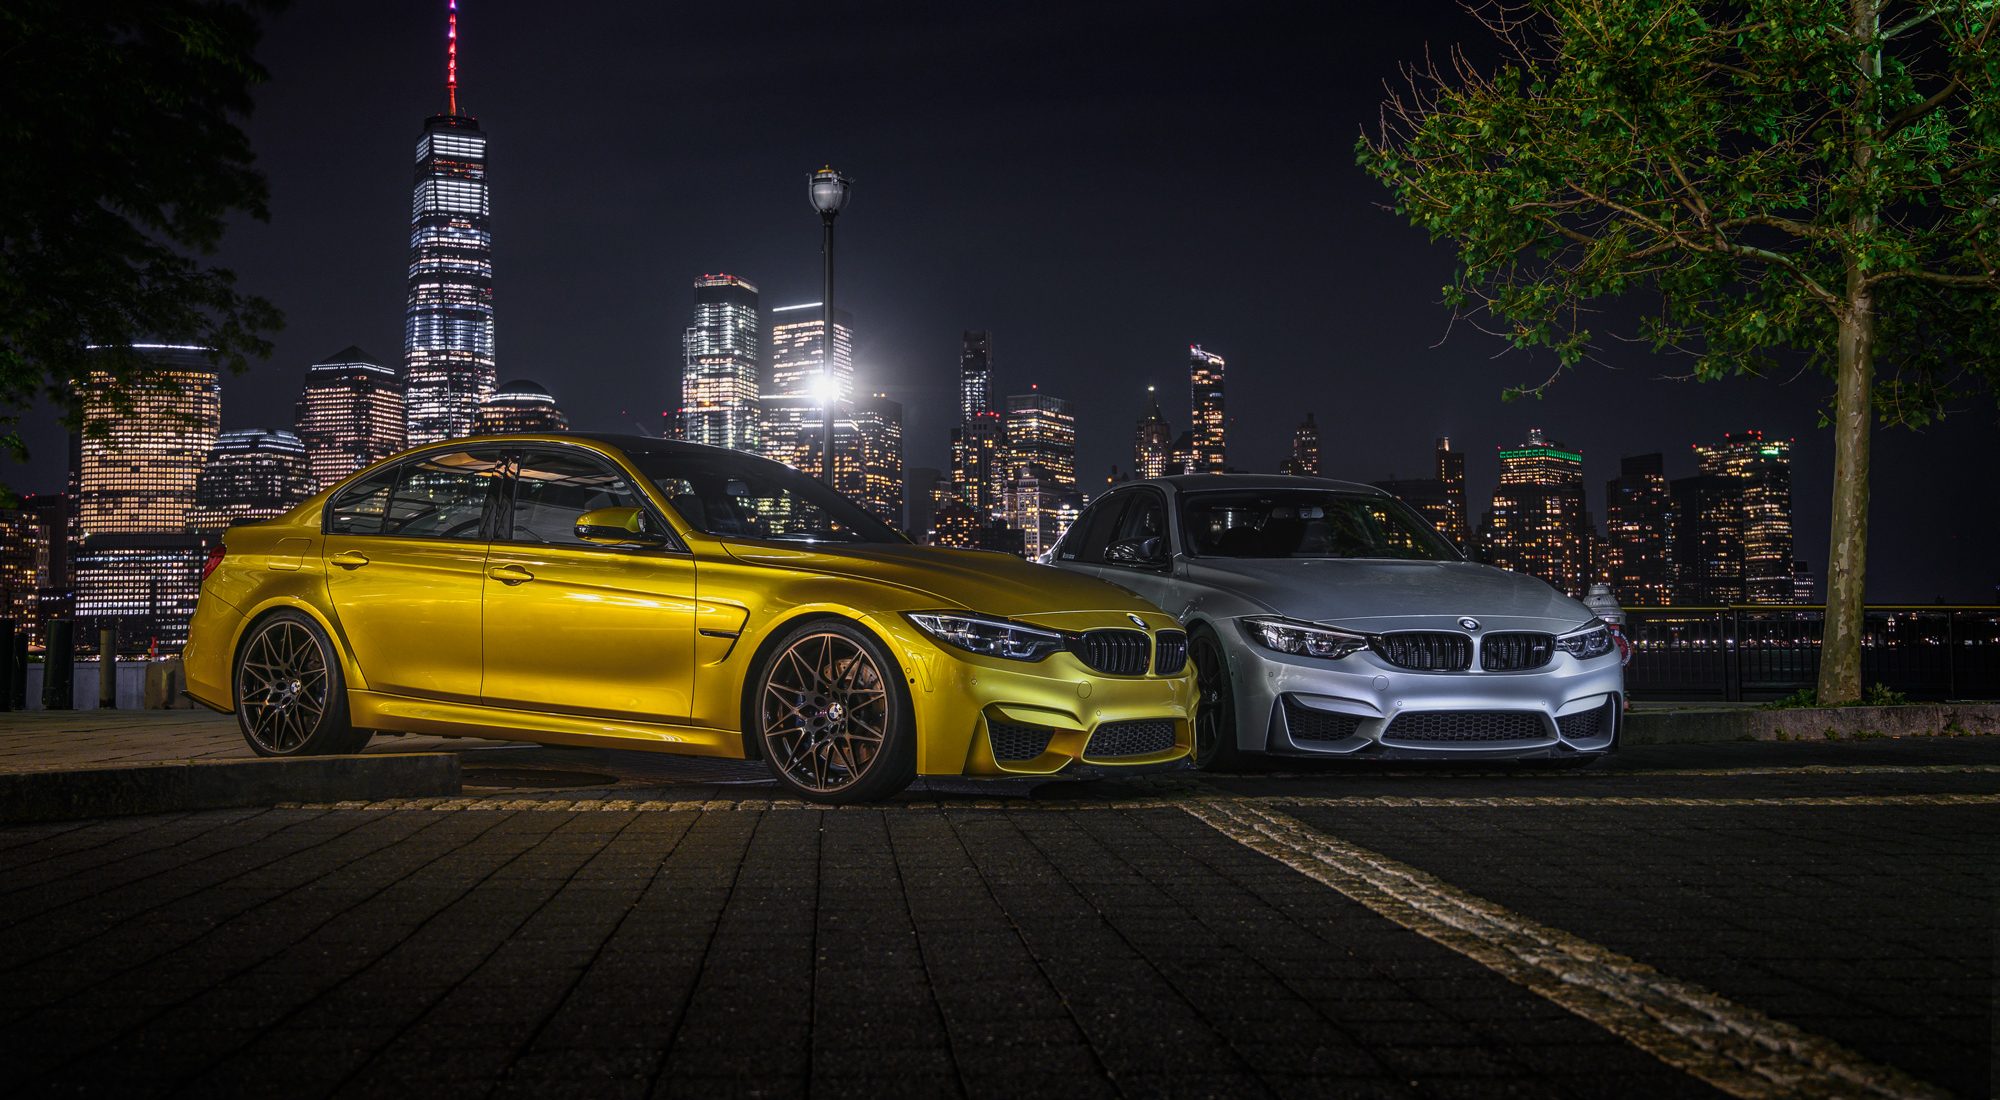 BMW M3 in NYC